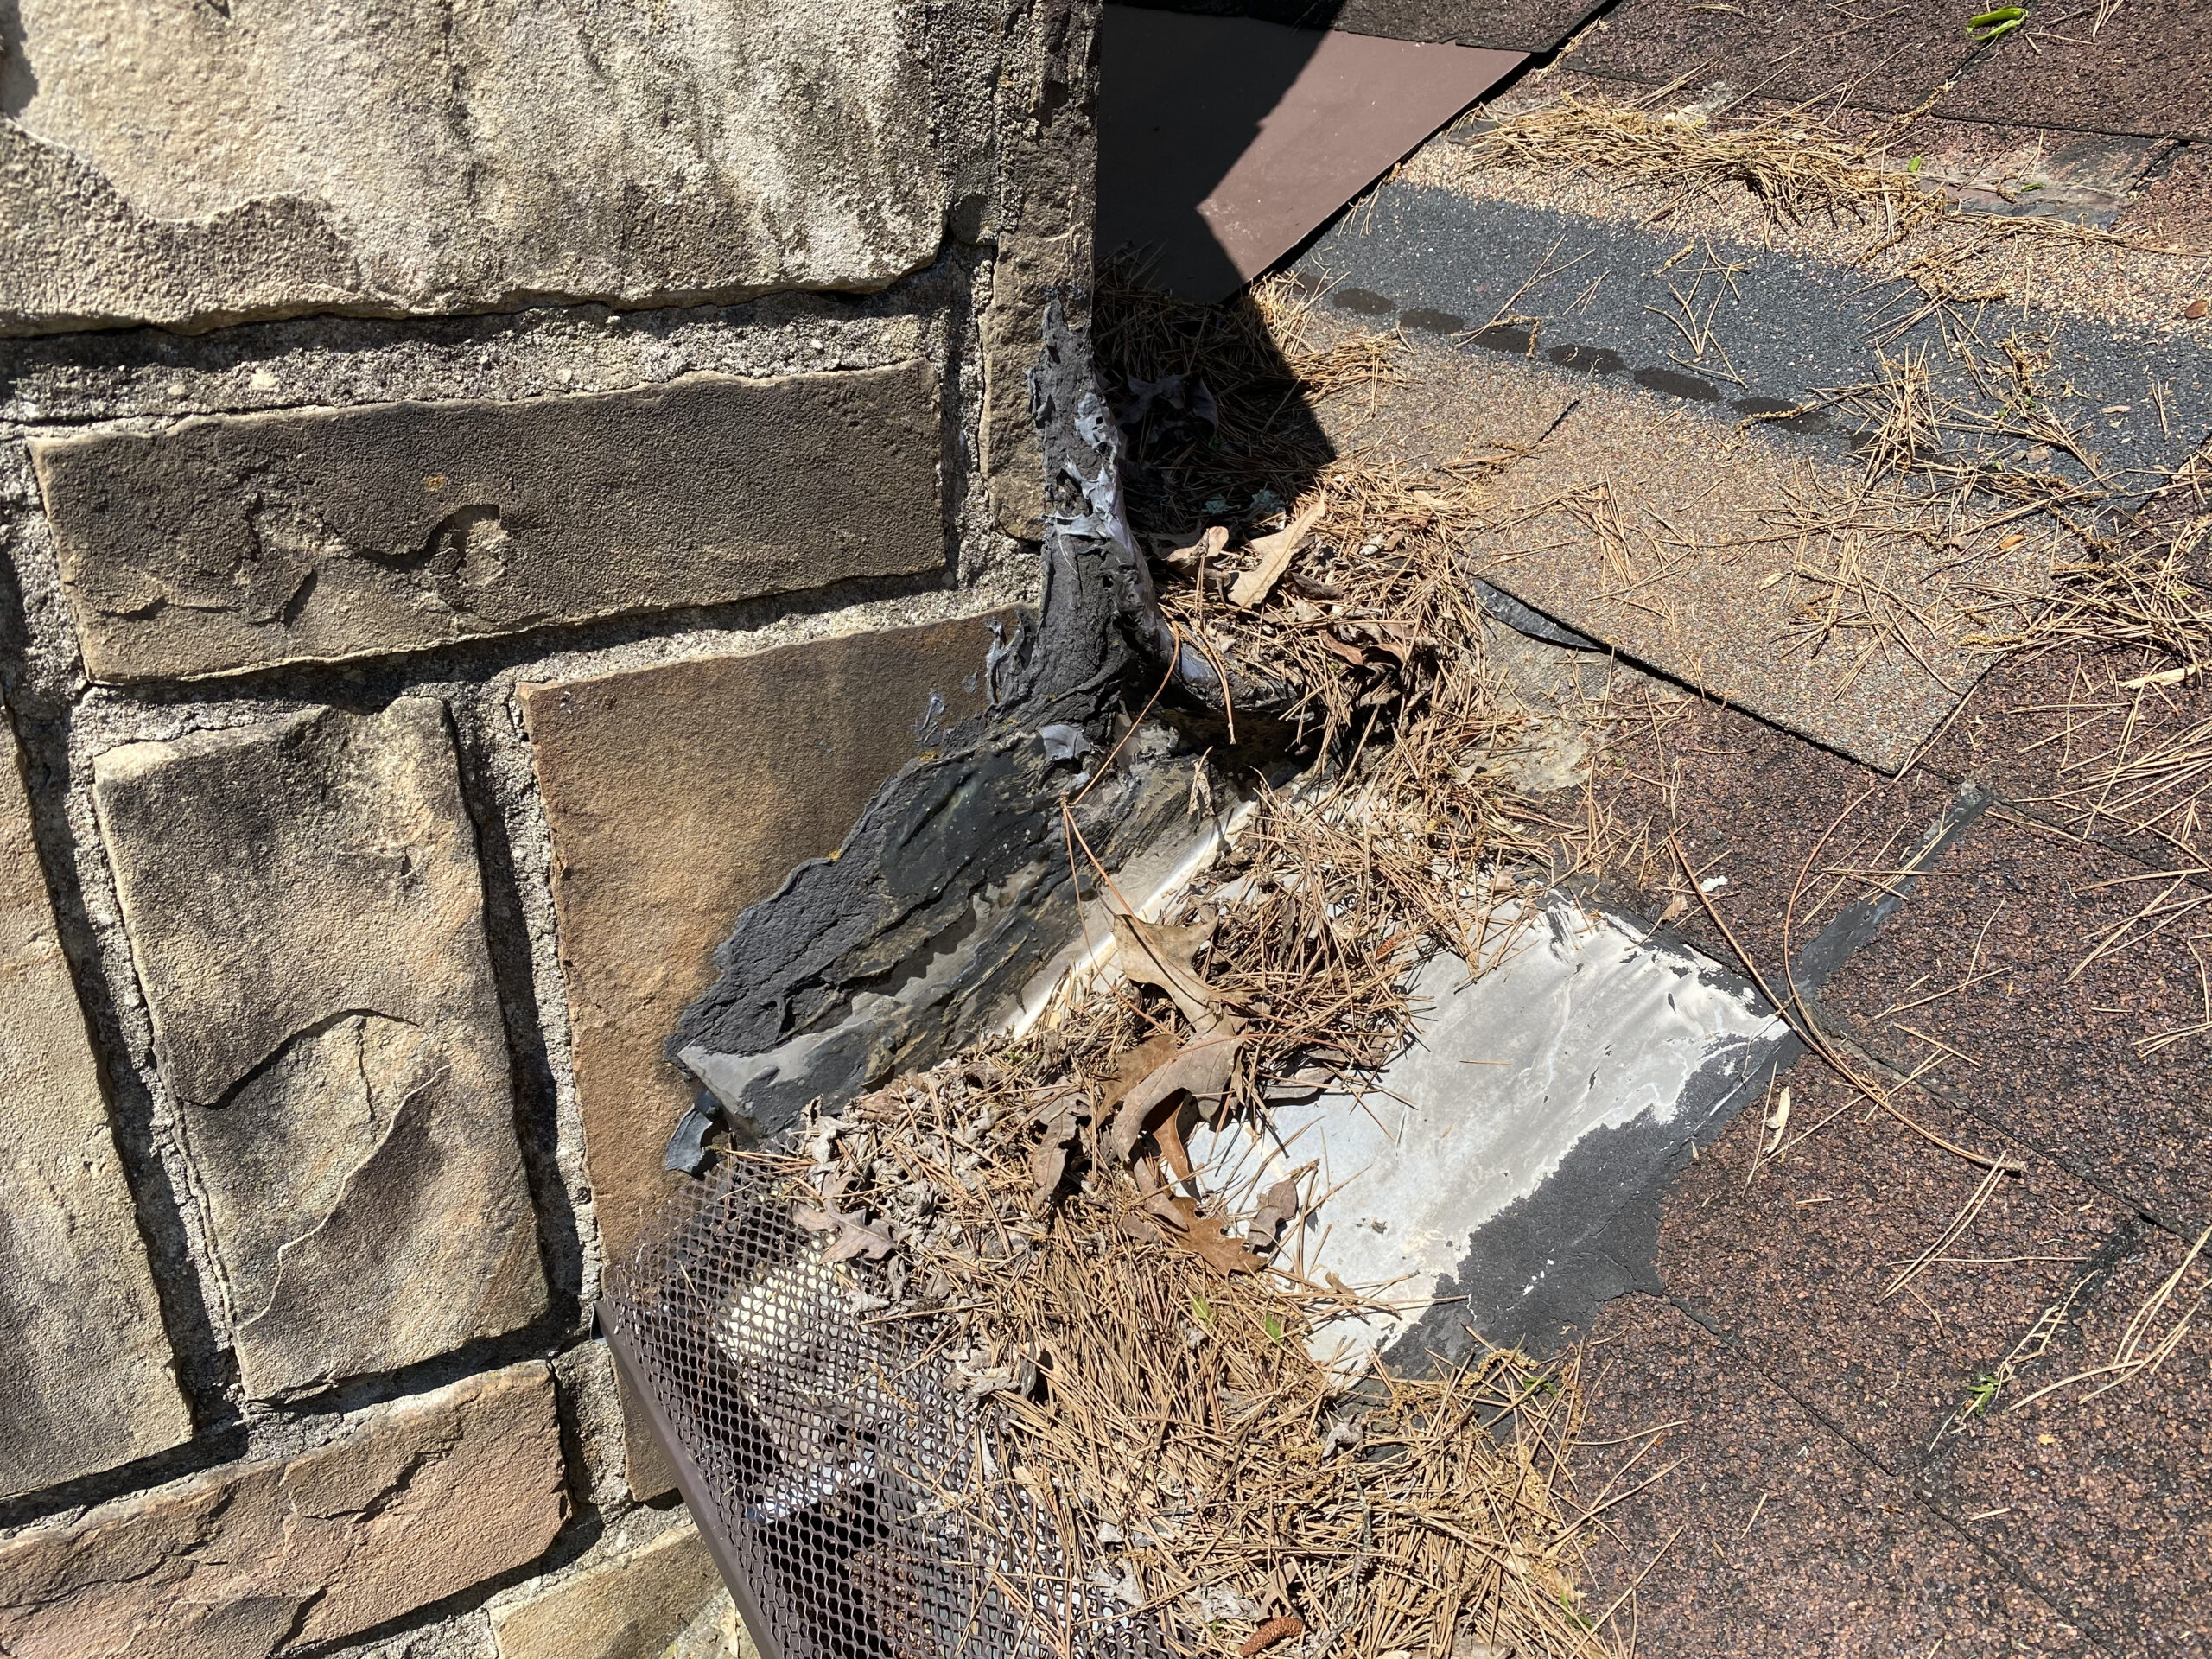 This is a picture of missing shingles and bad caulking at chimney flashing